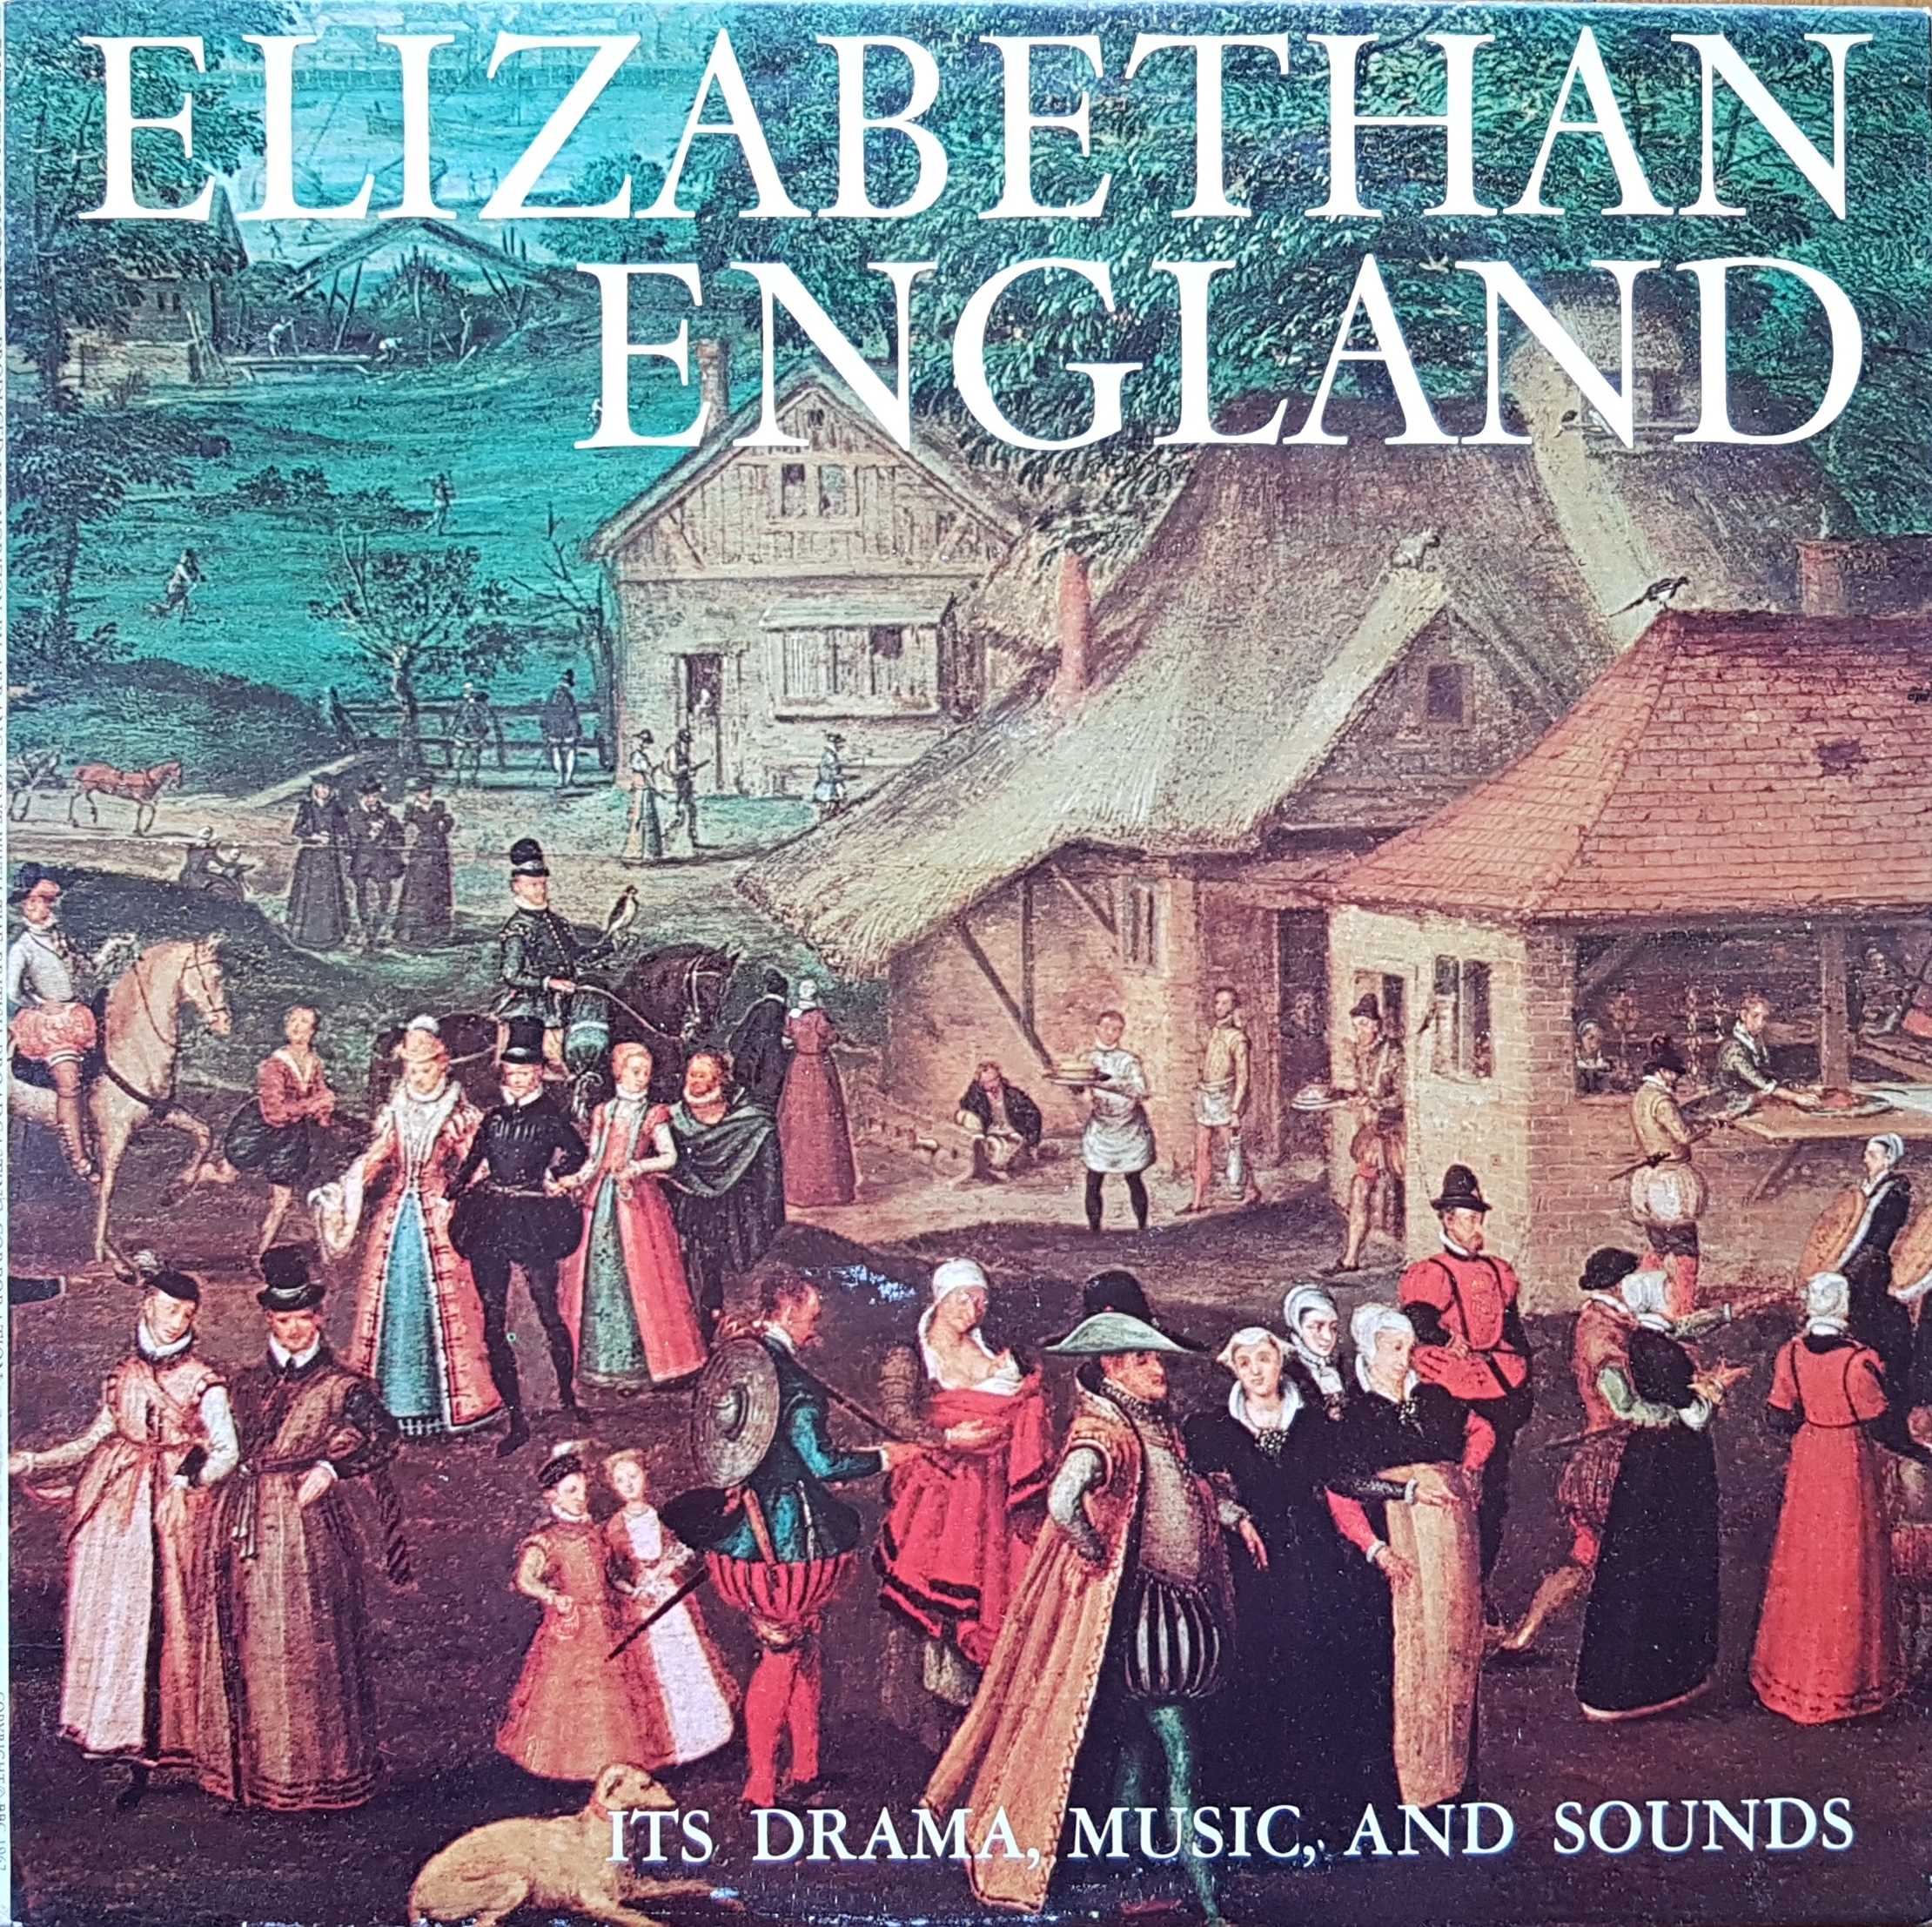 Picture of 124392 - 3A Elizabethan England (US import) by artist Various from the BBC albums - Records and Tapes library